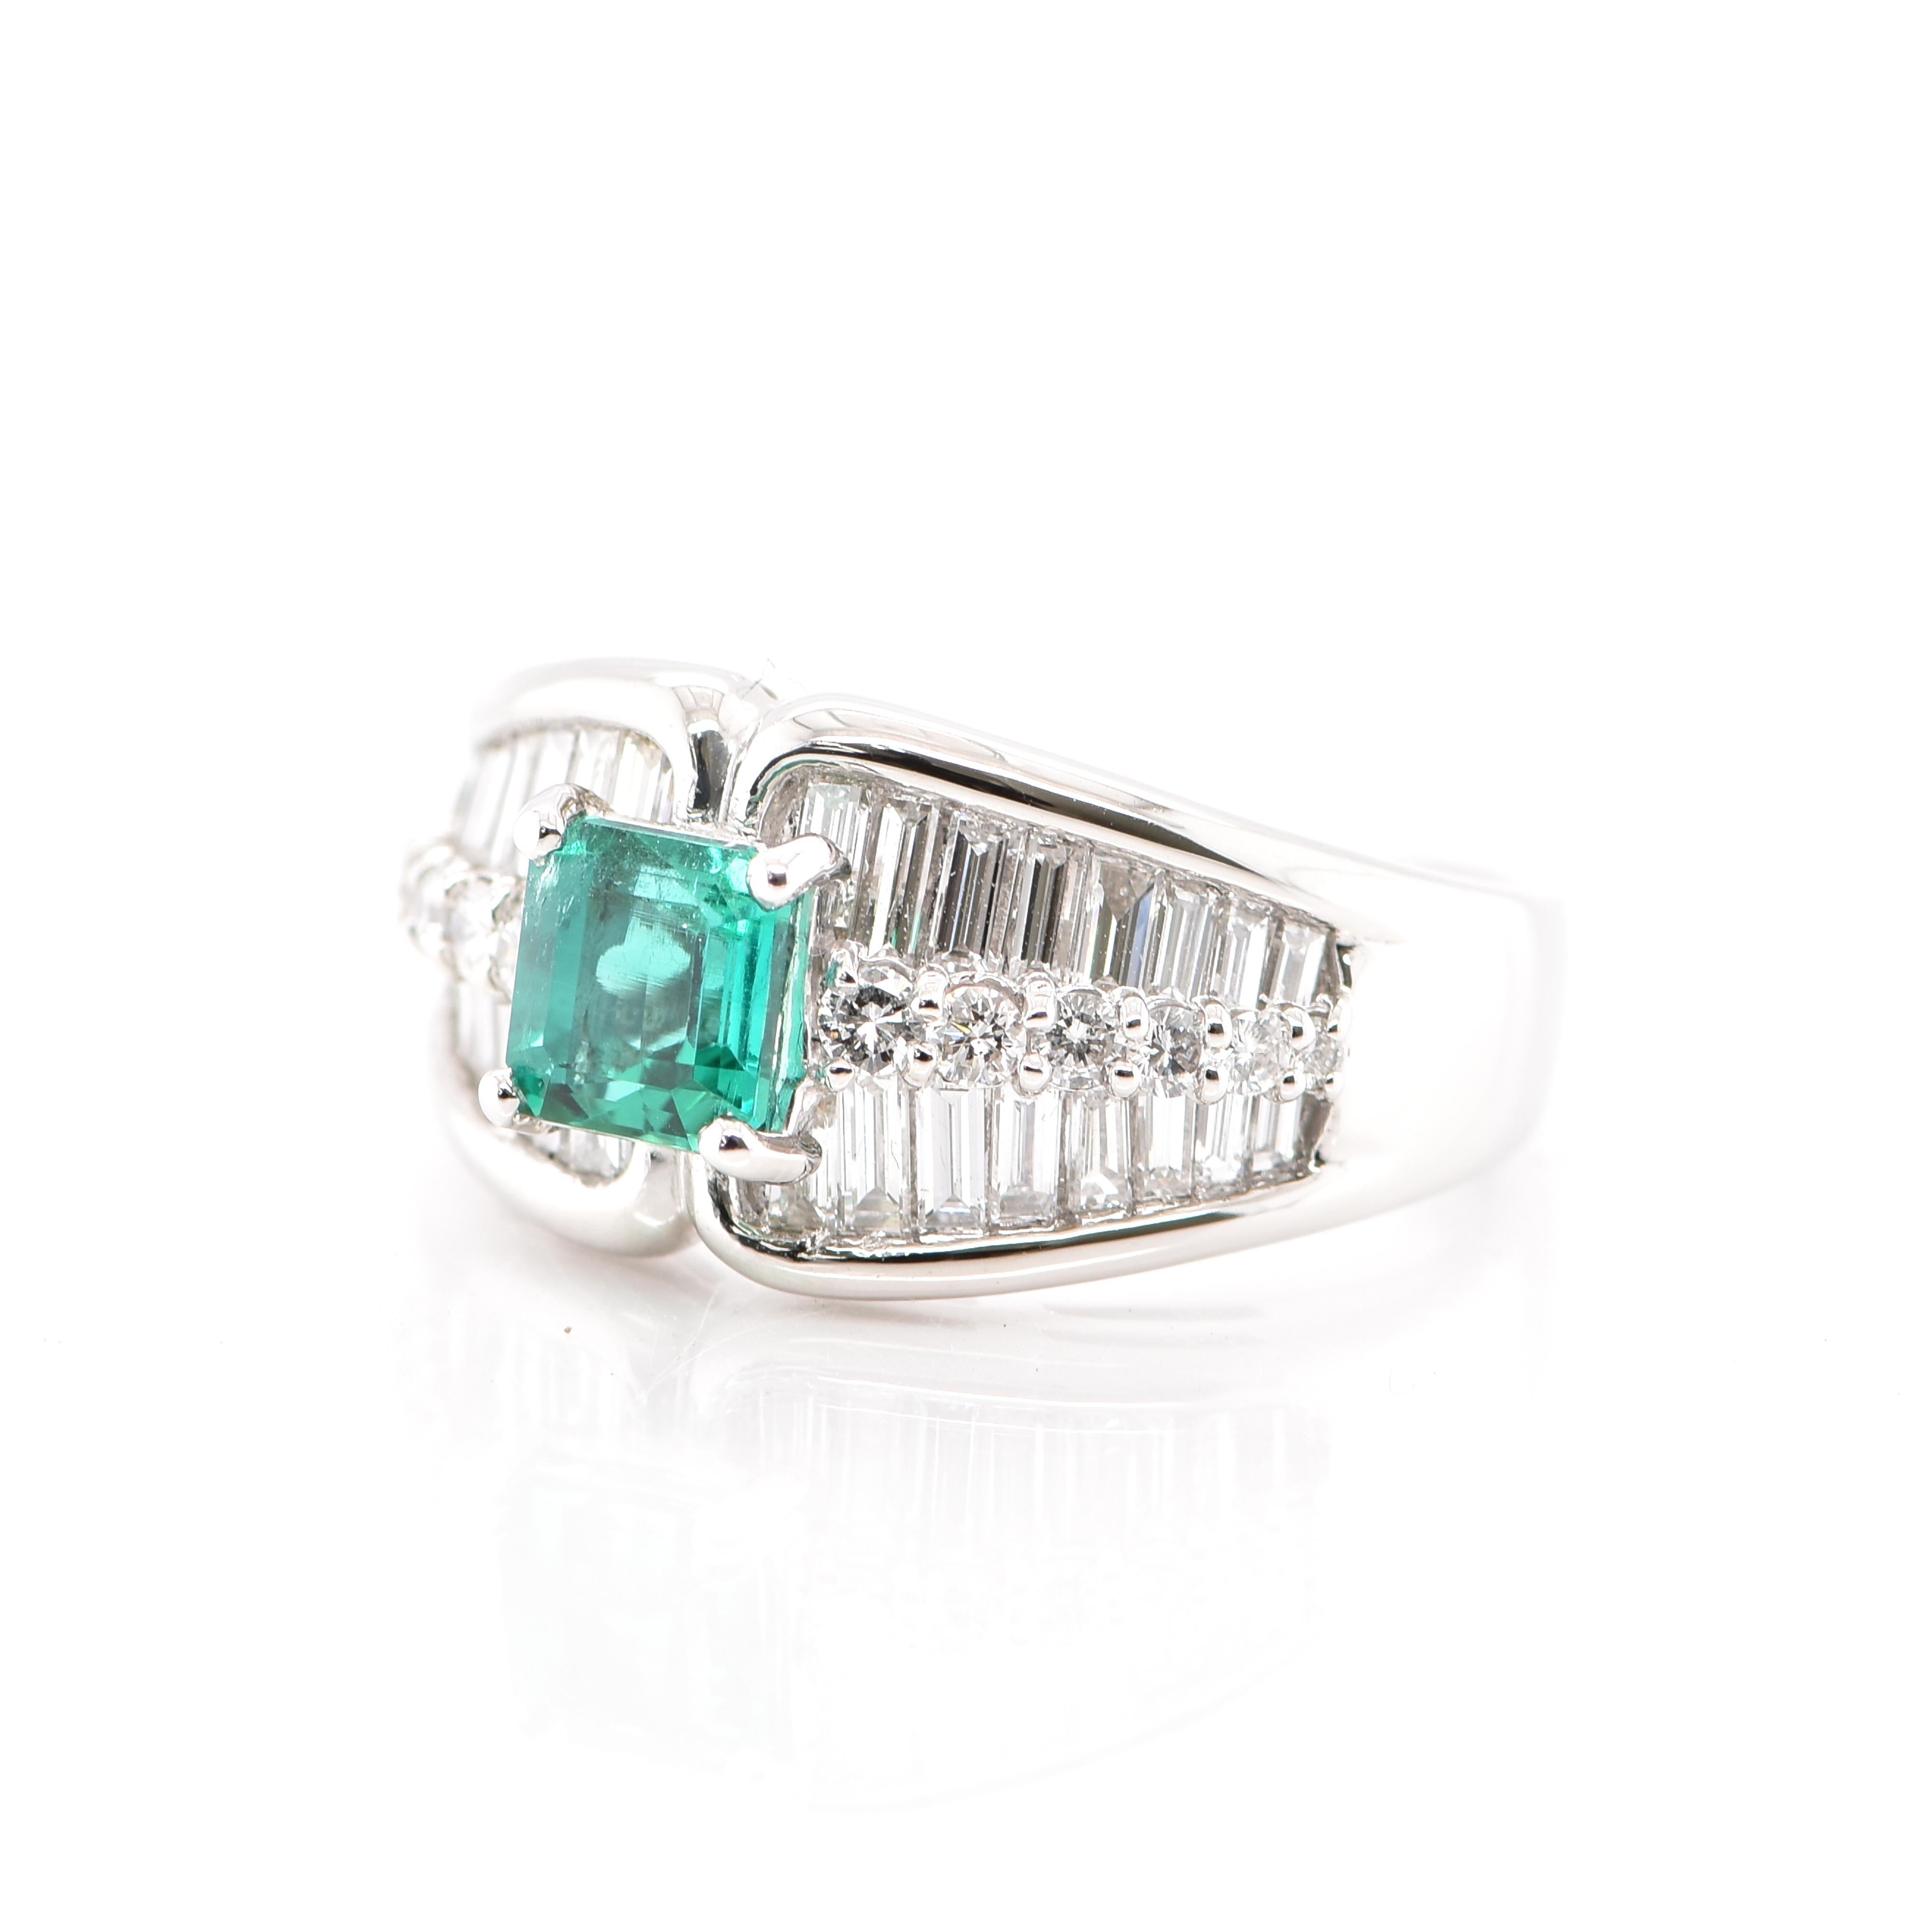 A stunning Cocktail Ring featuring a GIA Certified 1.03 Carat No Oil Colombian Emerald and 1.55 Carats of Diamond Accents set in Platinum. This Emerald is extremely rare as it is untreated whereas 95% of Emeralds in jewelry are clarity enhanced.